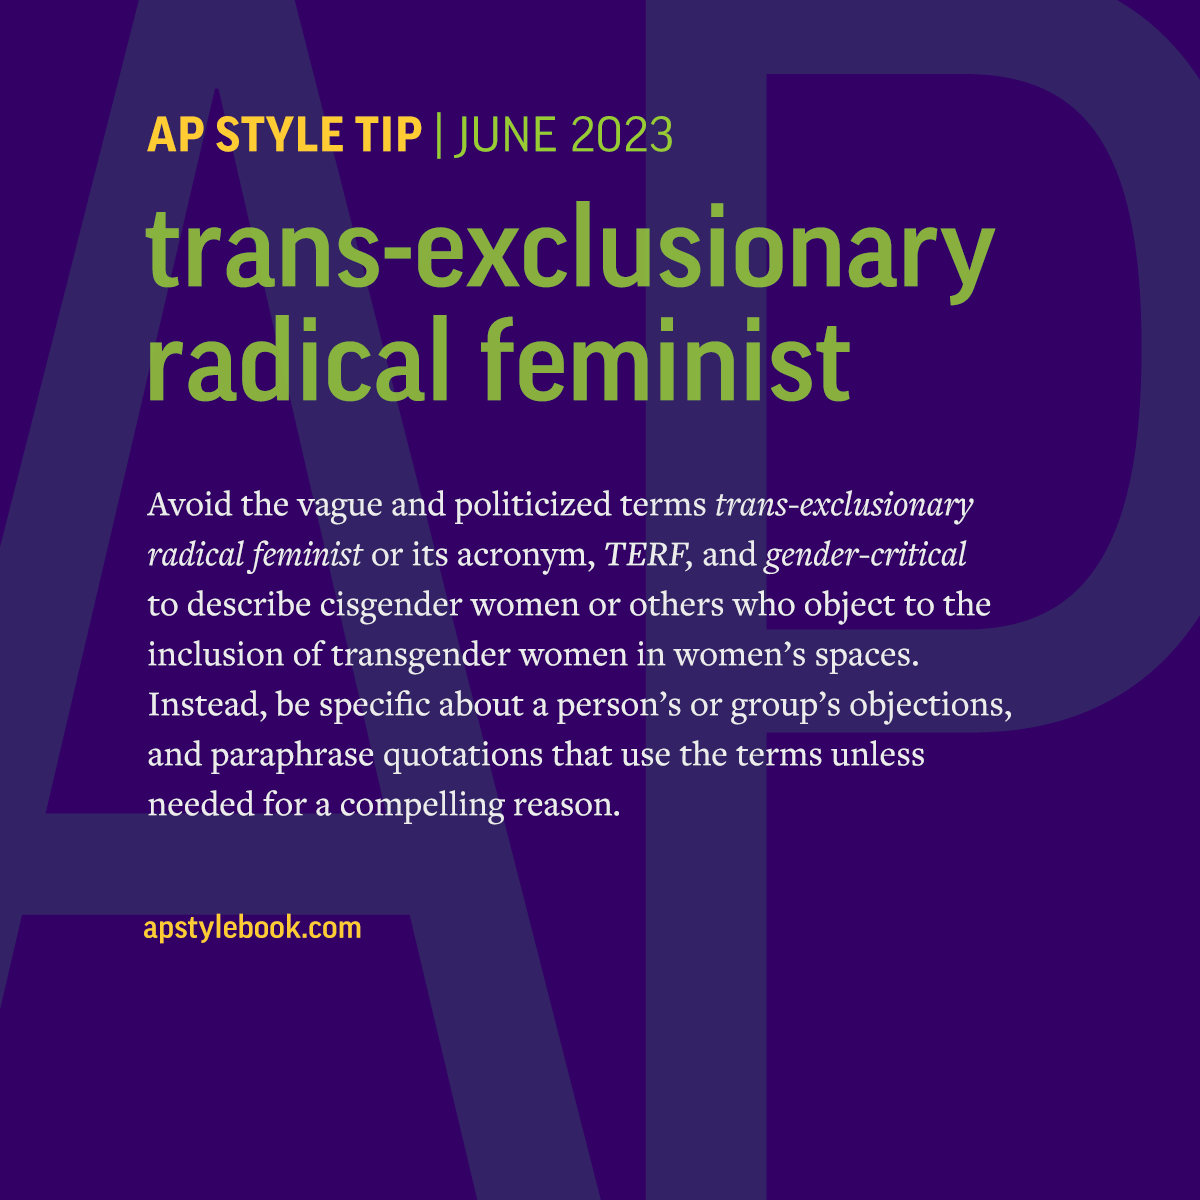 On our updated Transgender Topical Guide: trans-exclusionary radical feminist.
We recommend avoiding the vague and politicized term to describe cisgender women or others who object to the inclusion of transgender women in women's spaces.
apne.ws/OKUd9NS